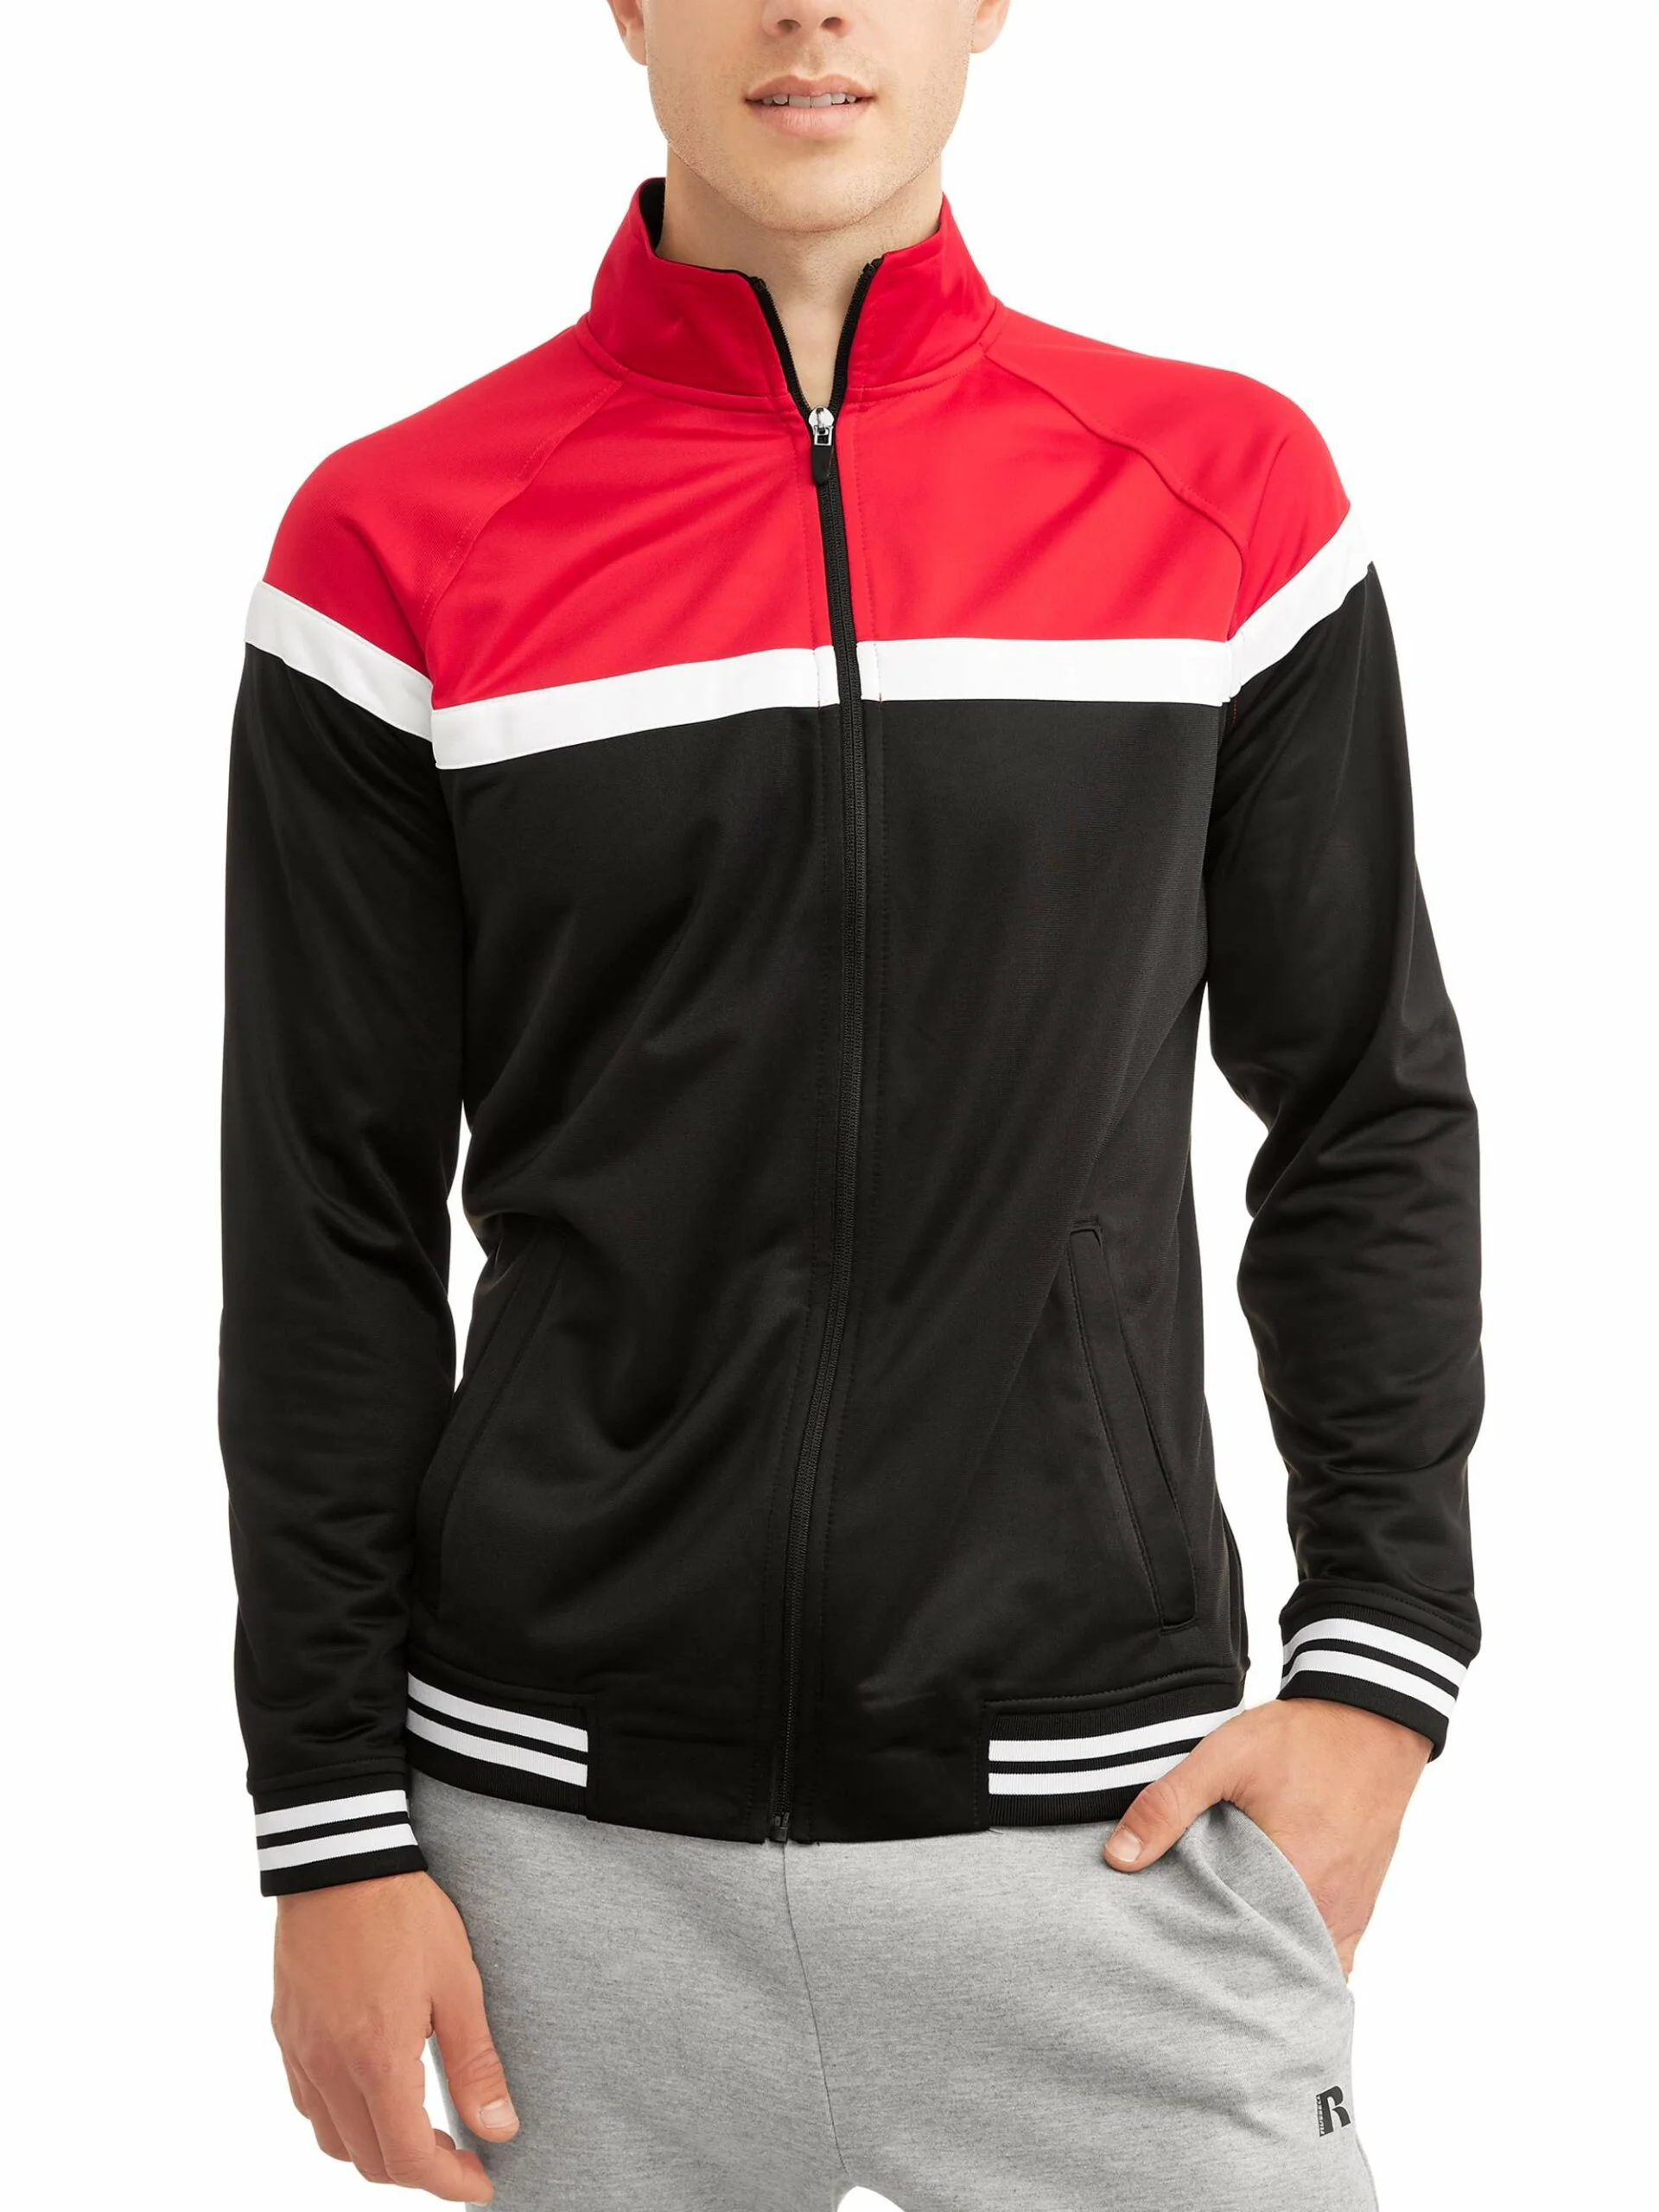 cotton jackets - Bangladesh Factory, Suppliers, Manufacturers